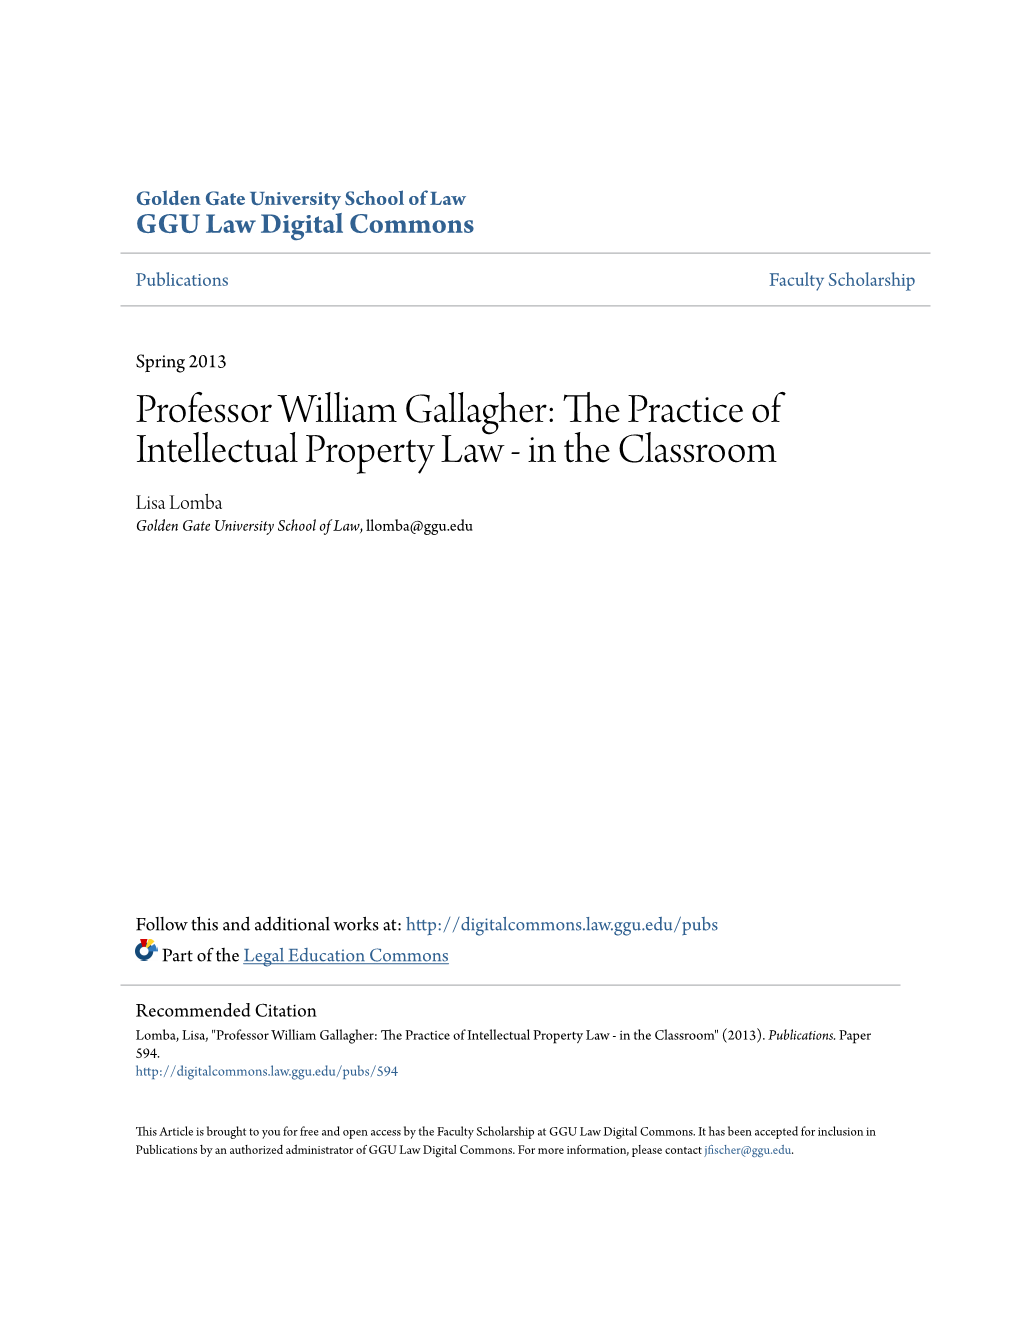 Professor William Gallagher: the Practice of Intellectual Property Law